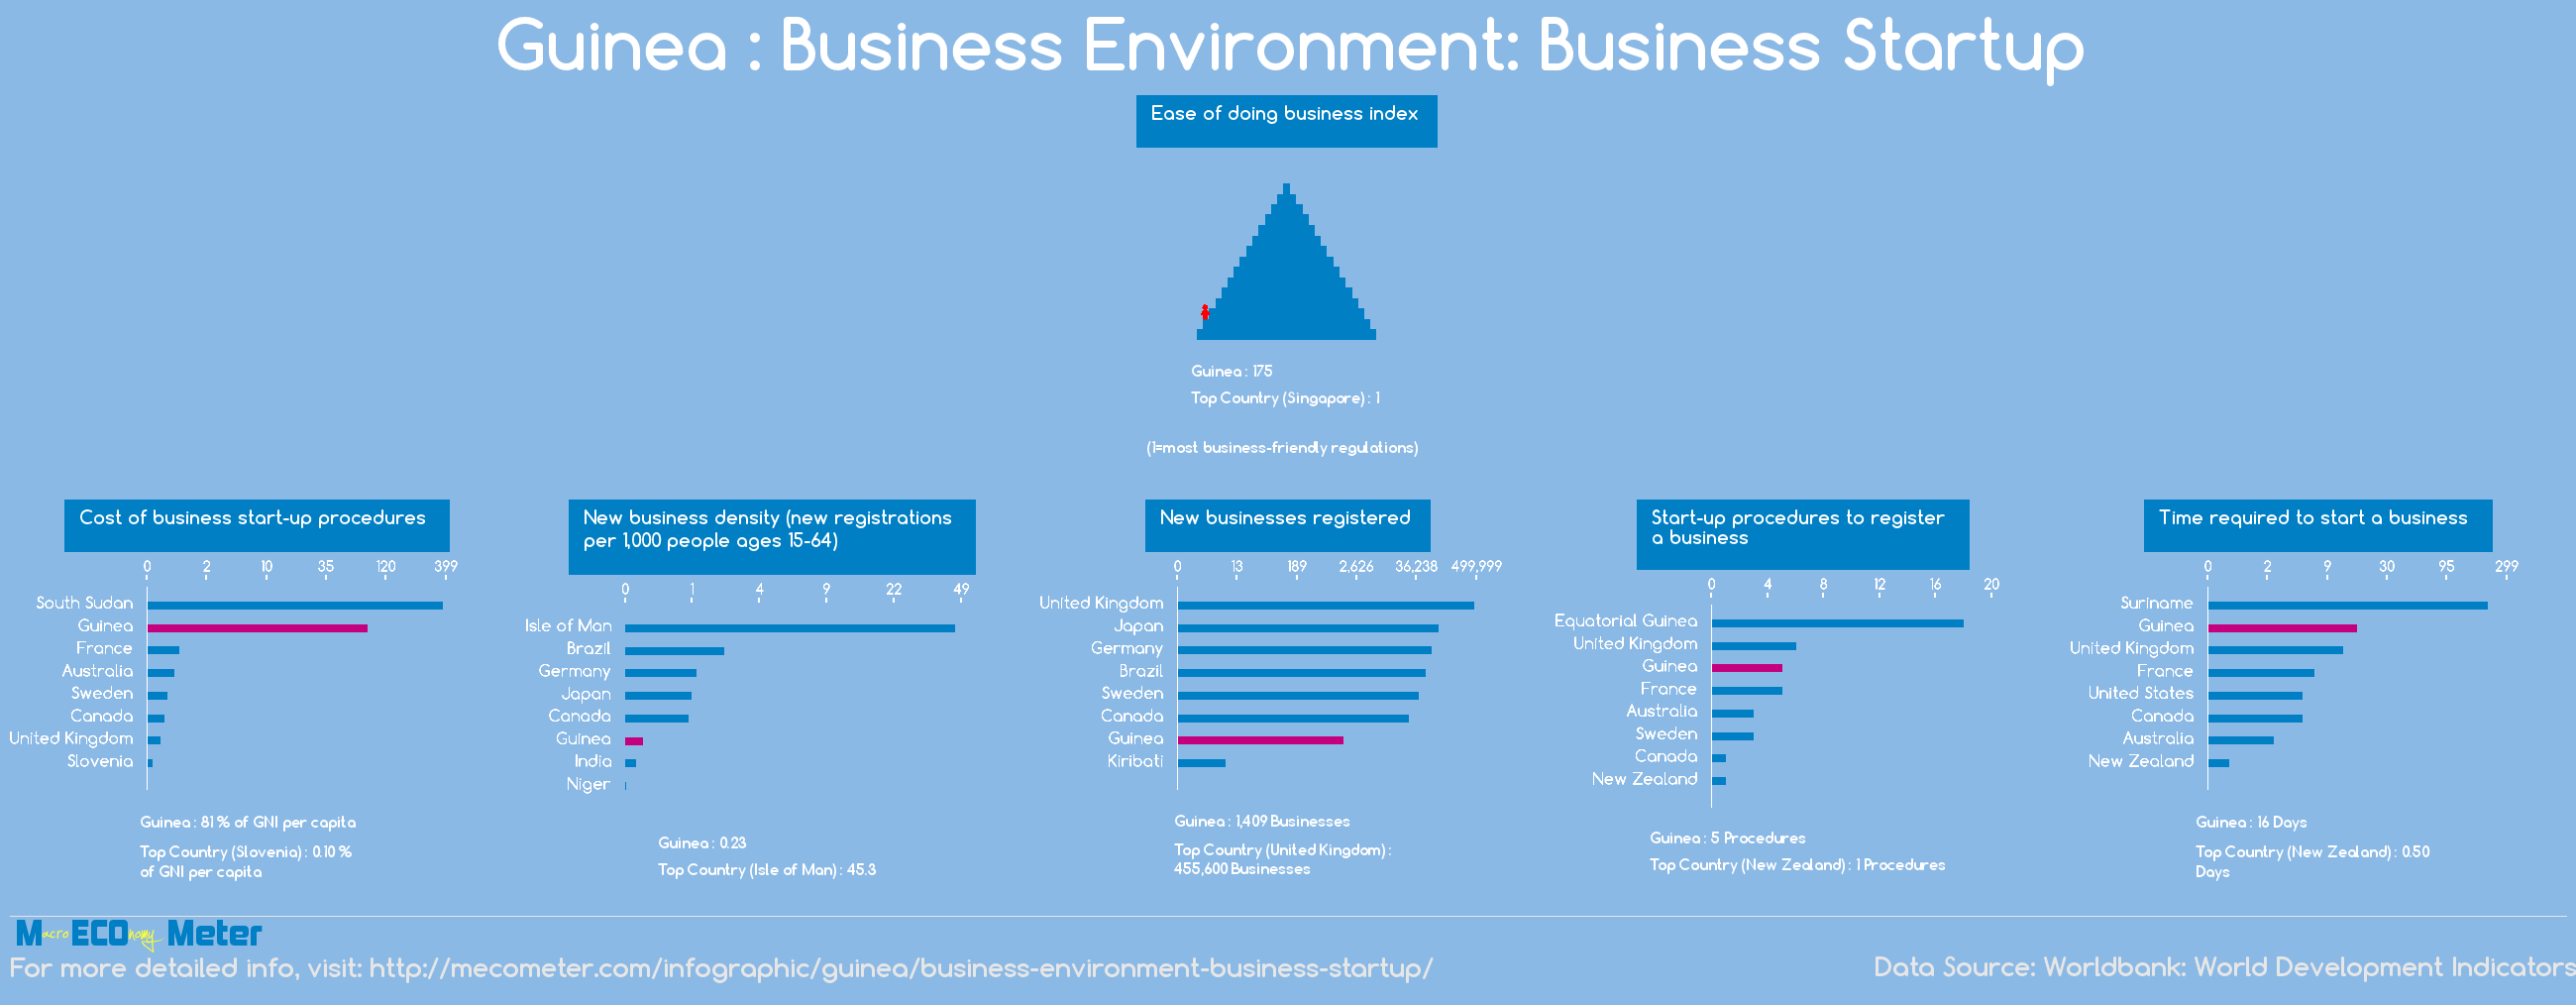 Guinea : Business Environment: Business Startup